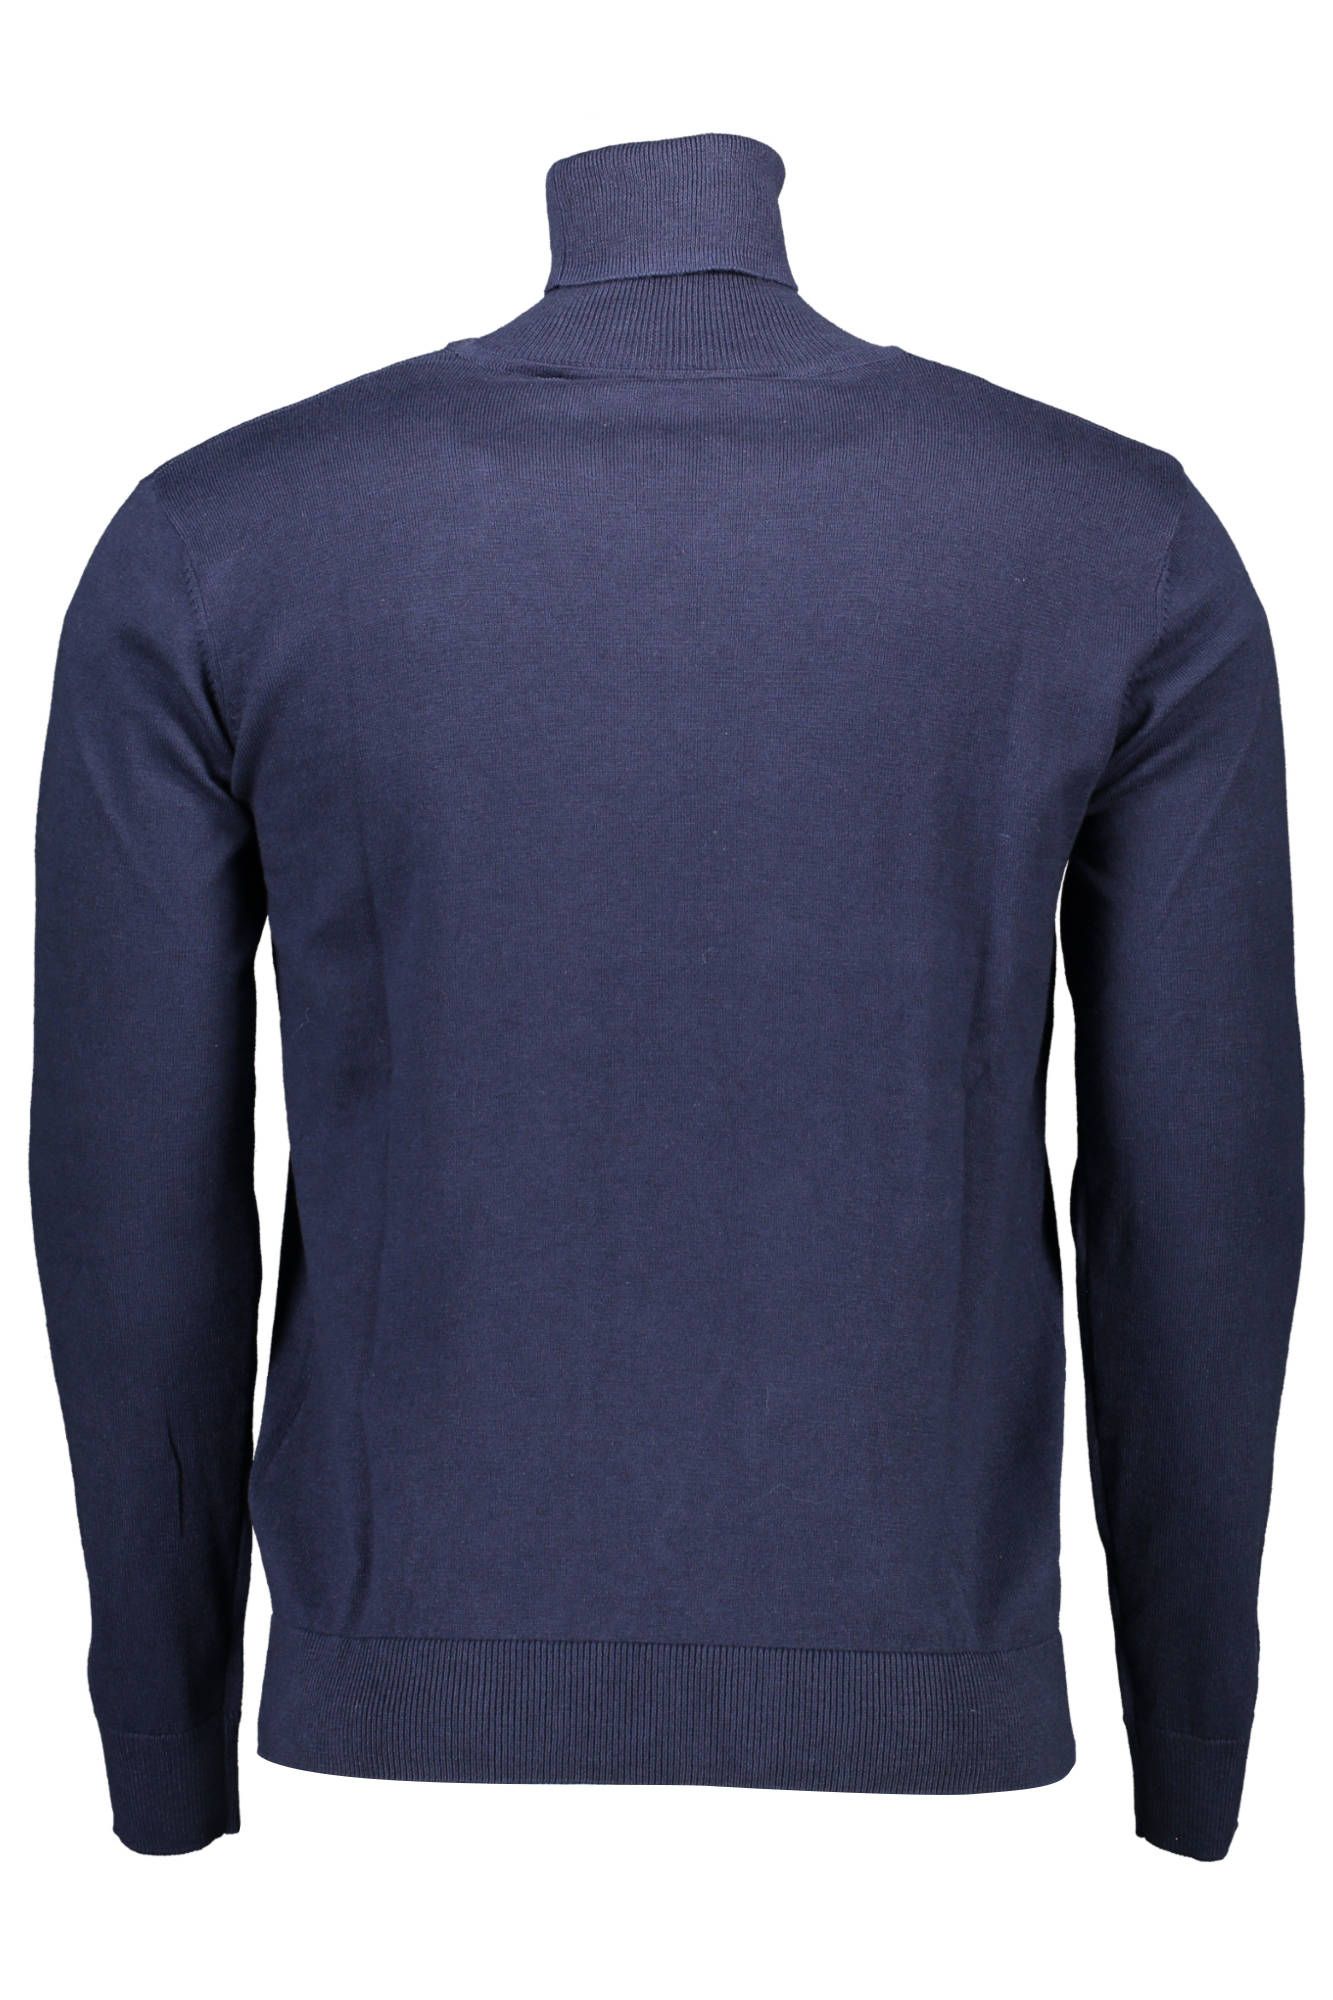 U.S. POLO ASSN. High Collar Embroidered Blue Sweater